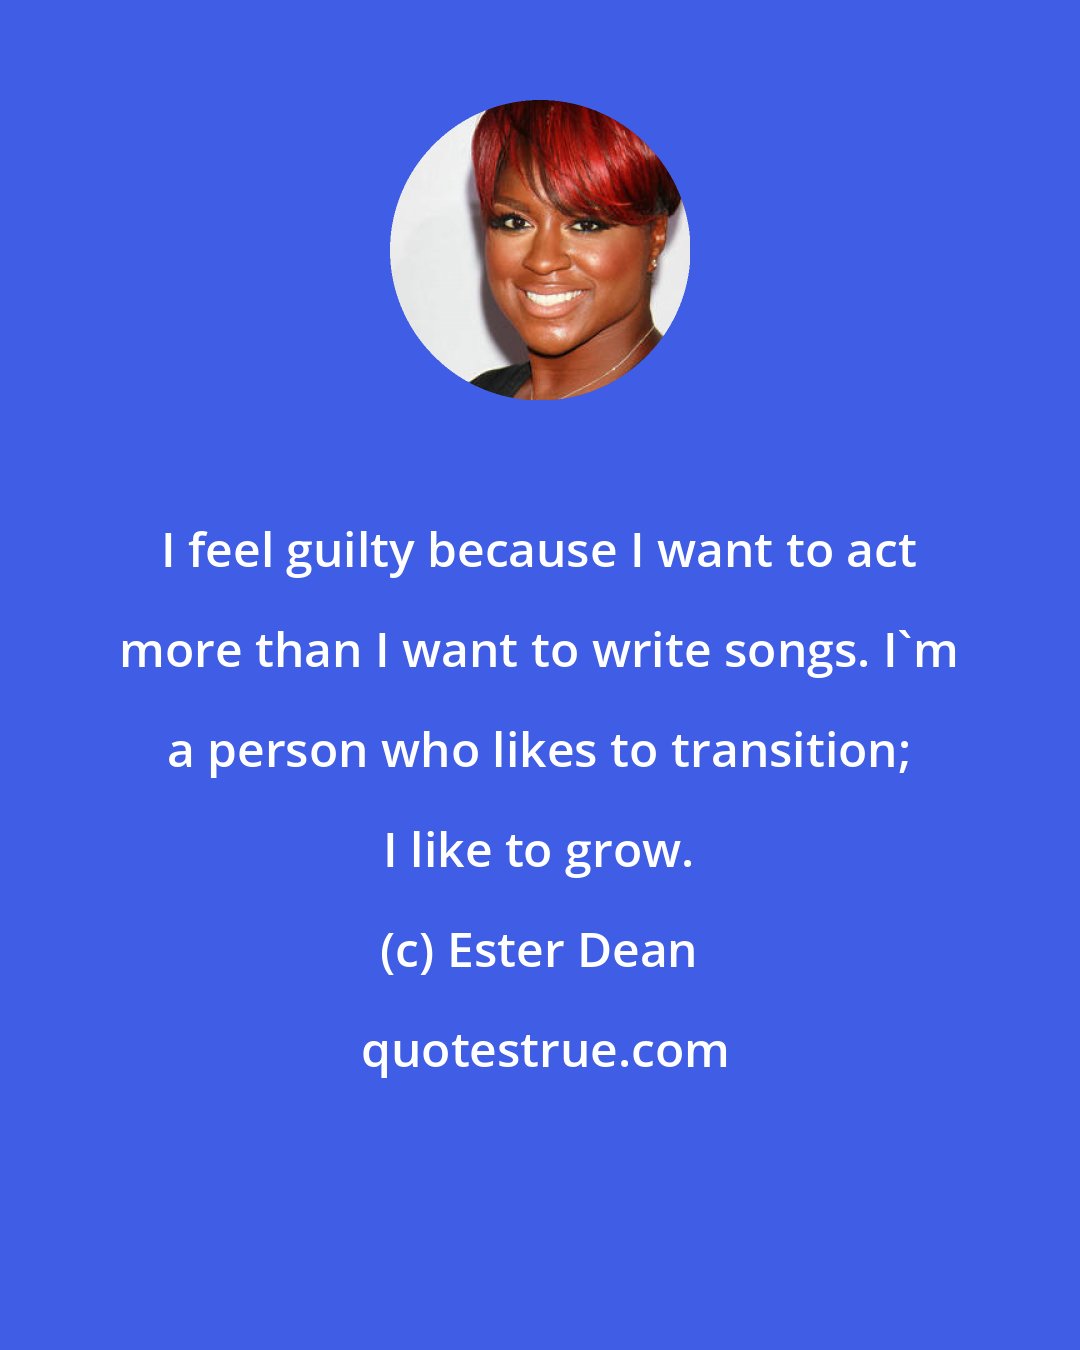 Ester Dean: I feel guilty because I want to act more than I want to write songs. I'm a person who likes to transition; I like to grow.